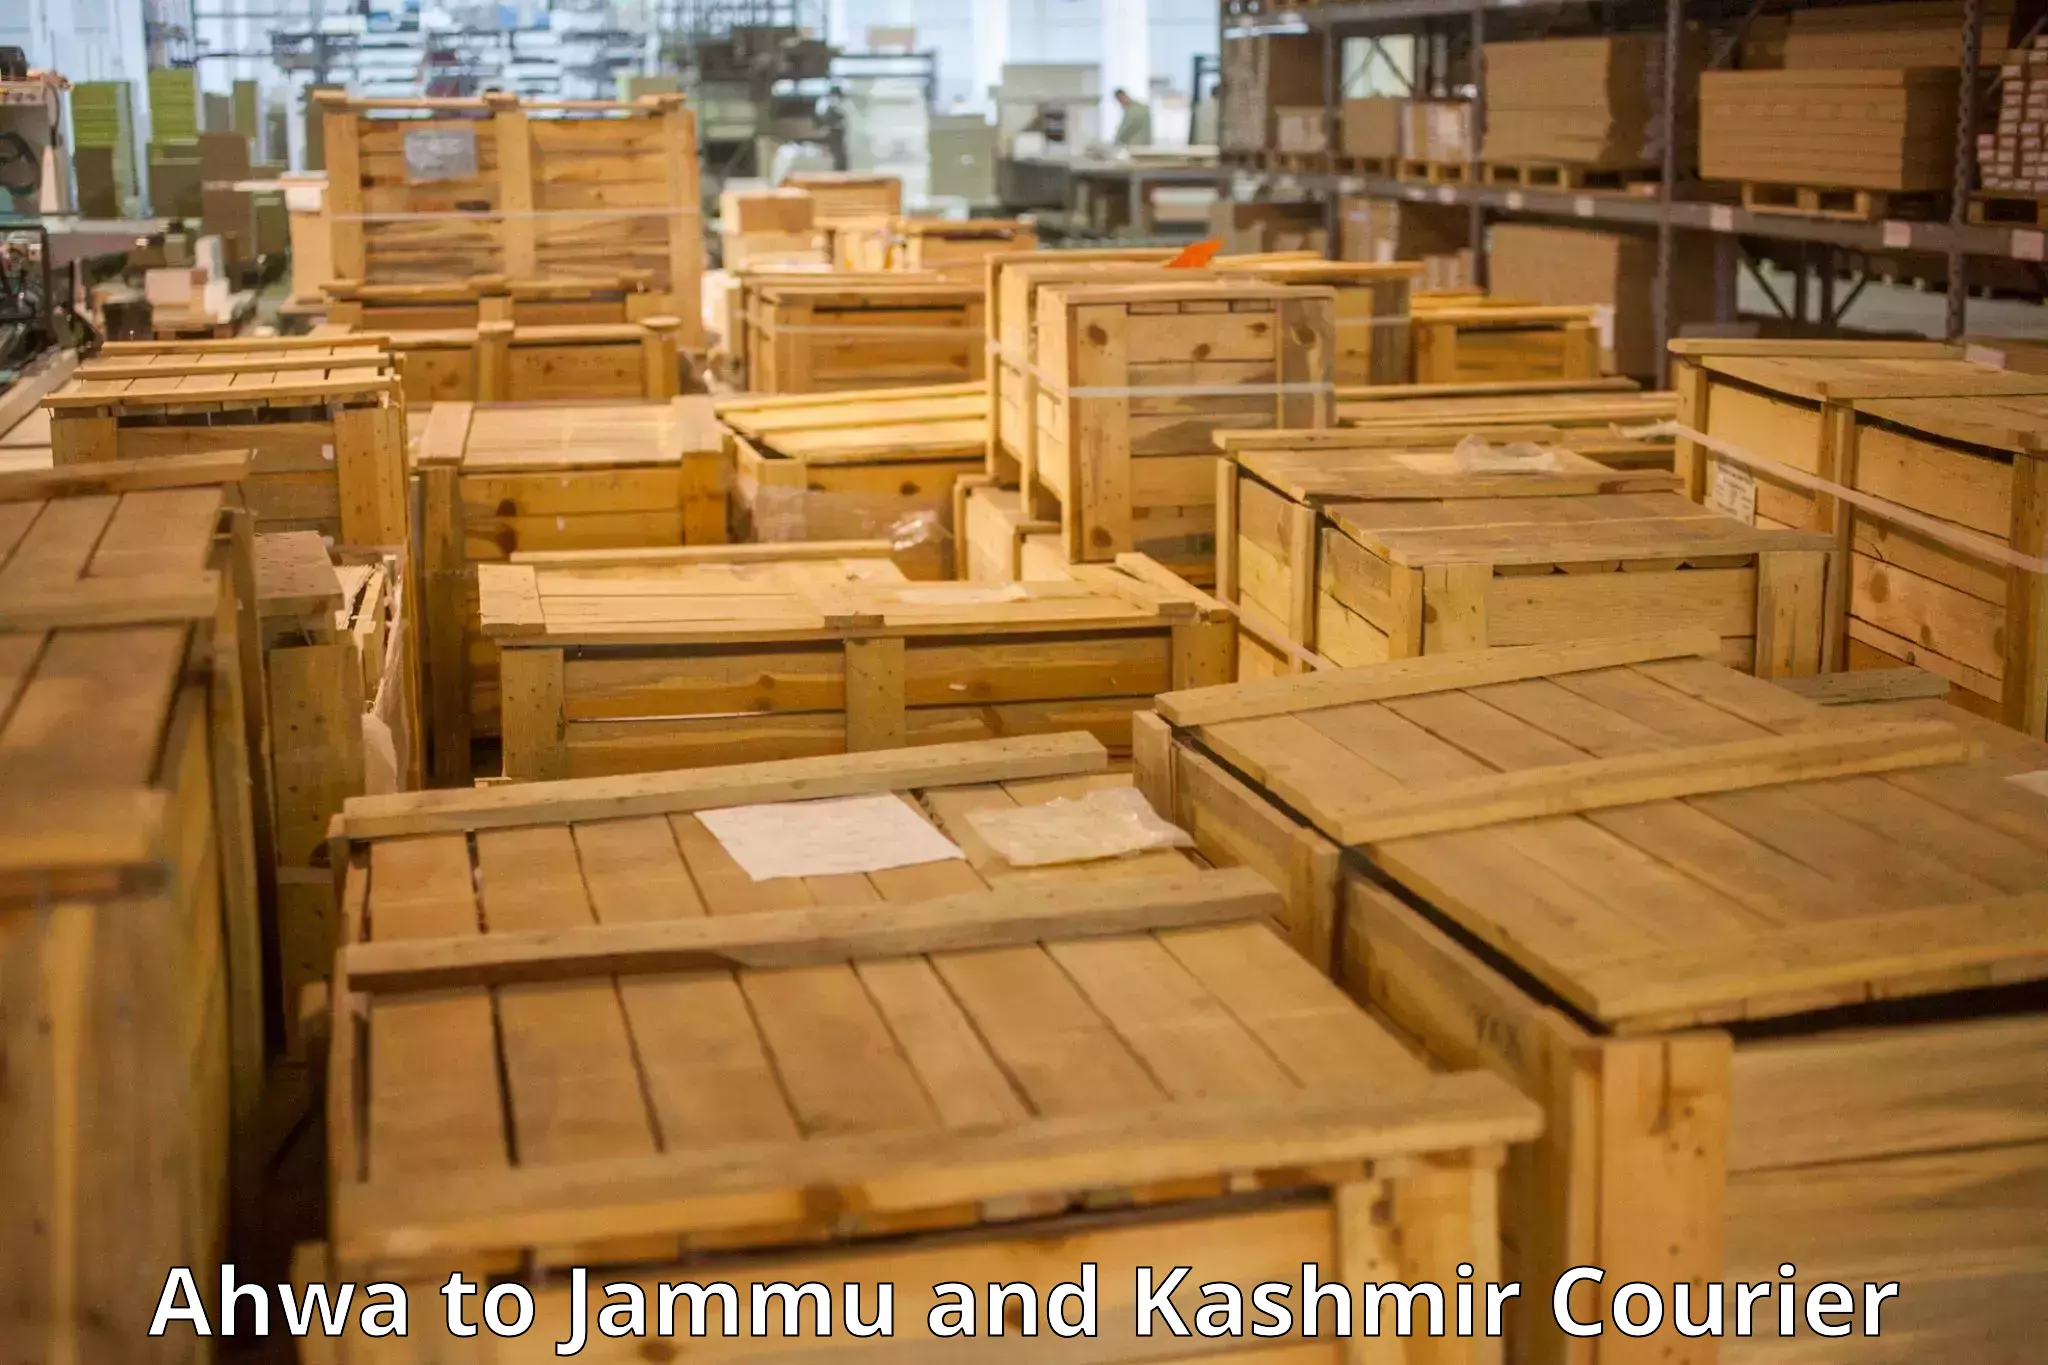 Luggage transport deals Ahwa to Jammu and Kashmir